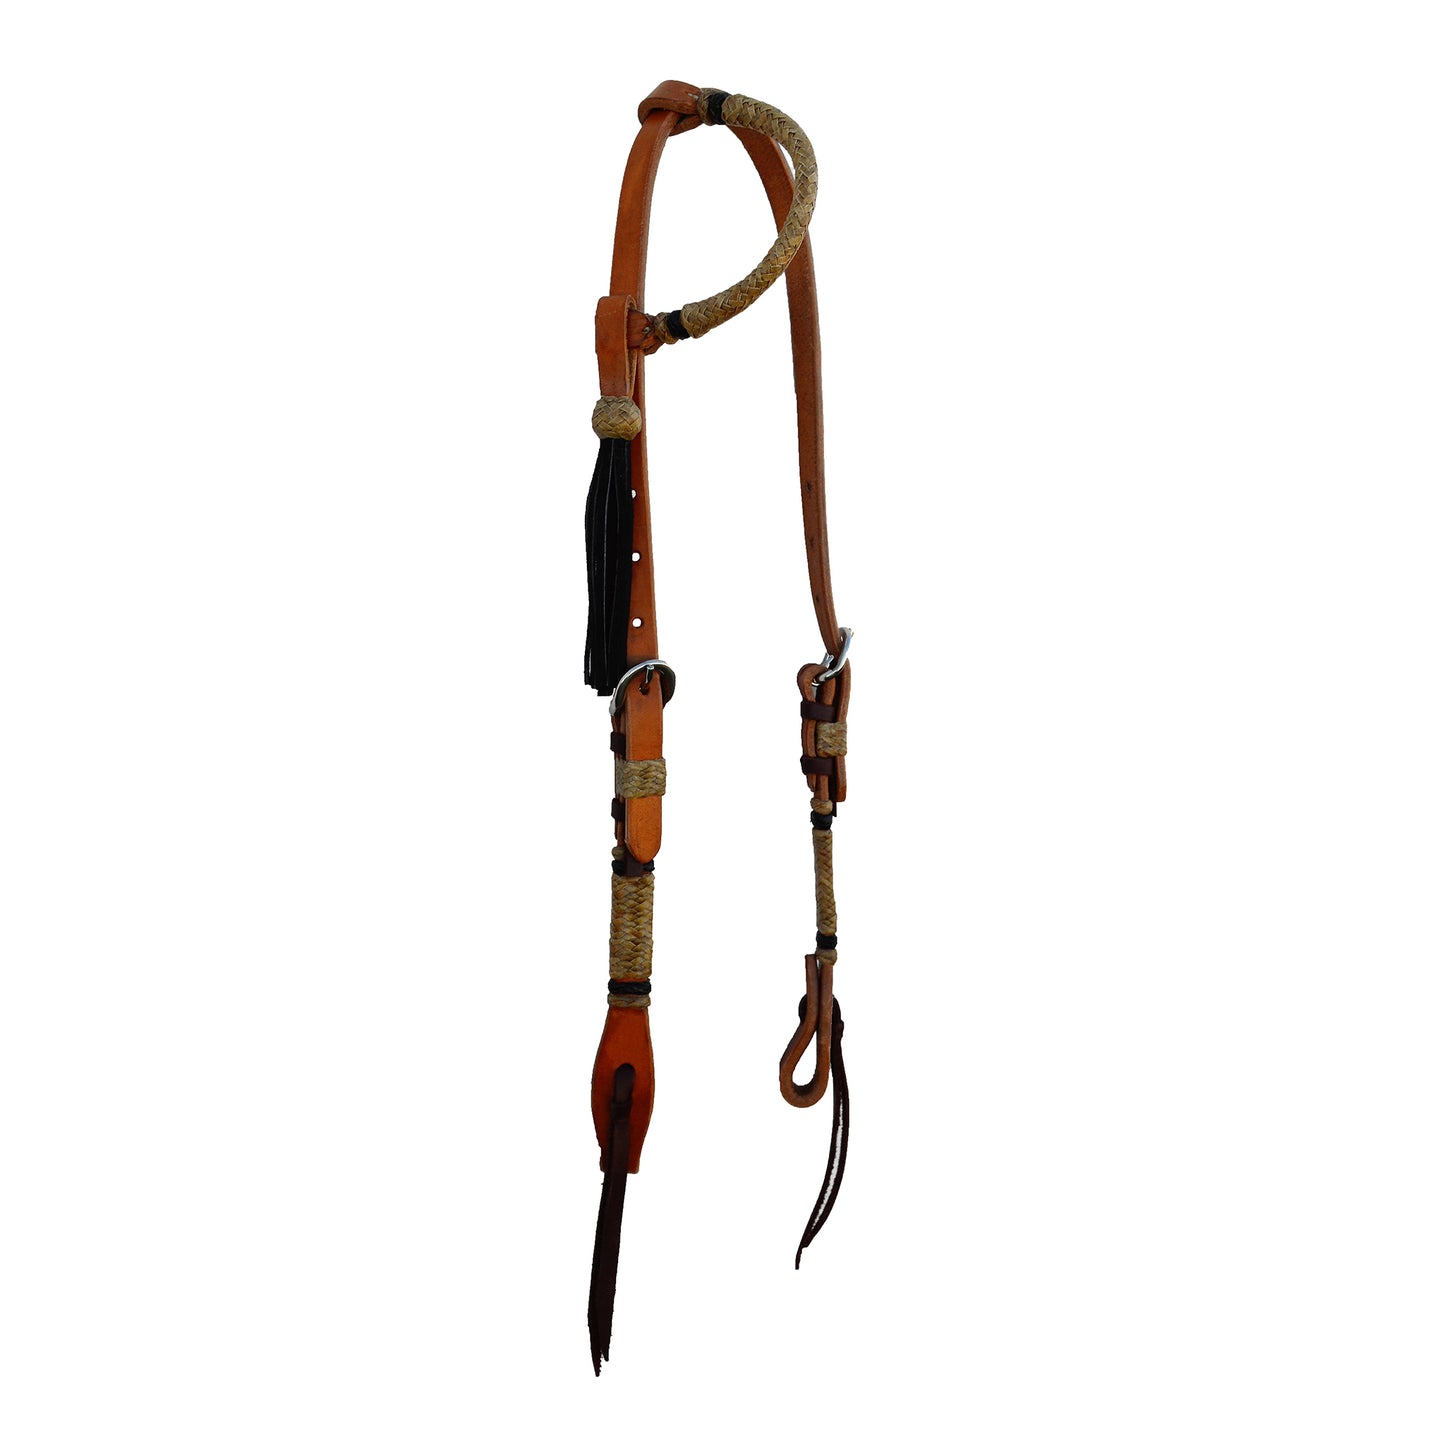 5/8" round one ear headstall harness leather rawhide and black braided stripes with braided loops and black tassel.